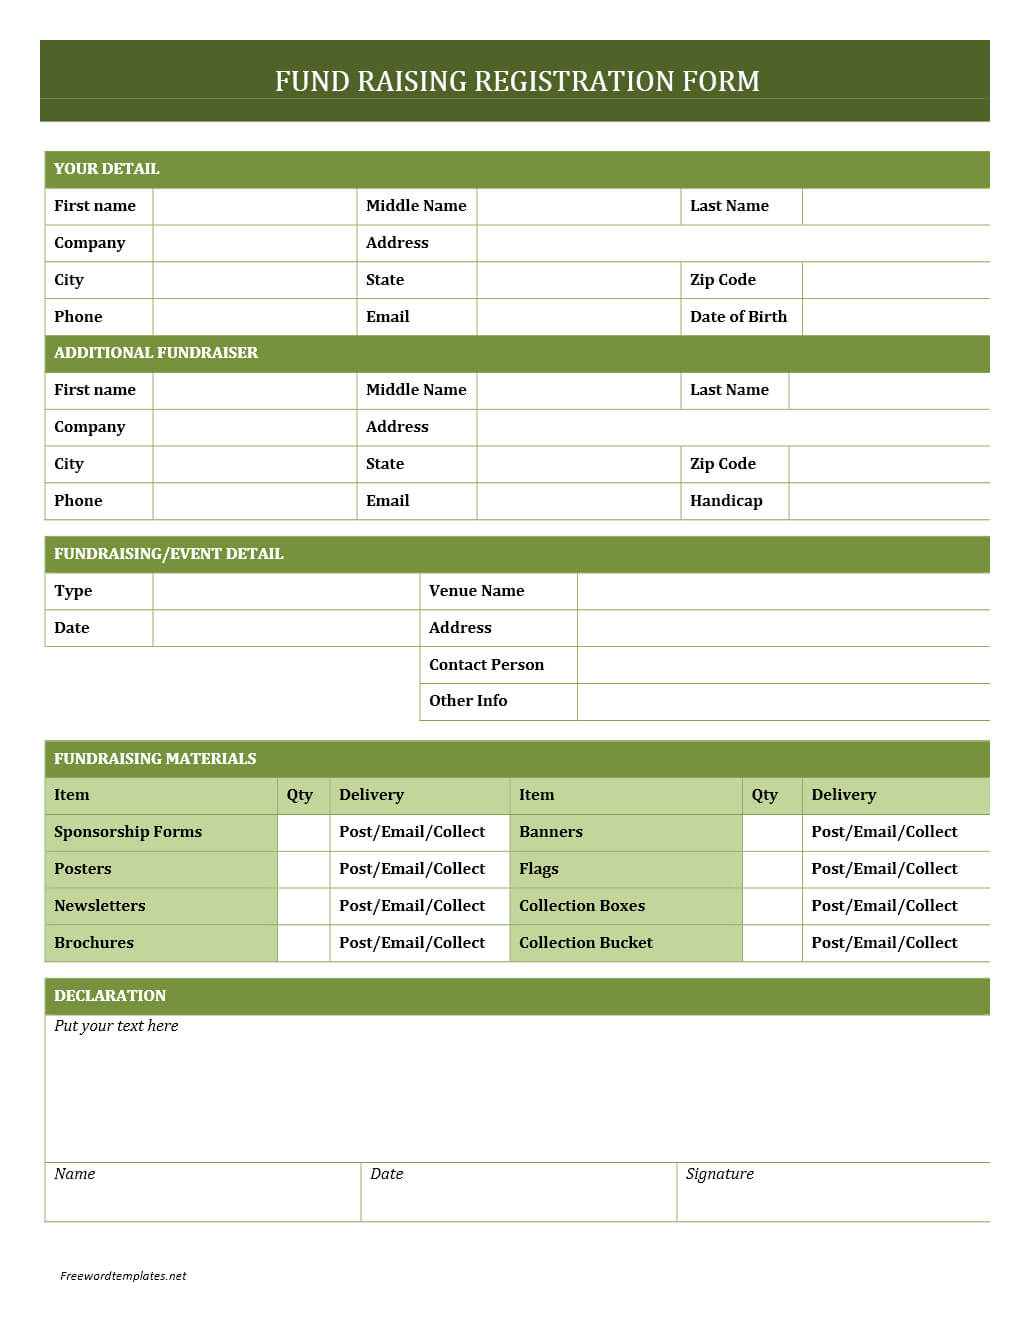 Registration Form Template Word Free – Atlantaauctionco Throughout Registration Form Template Word Free